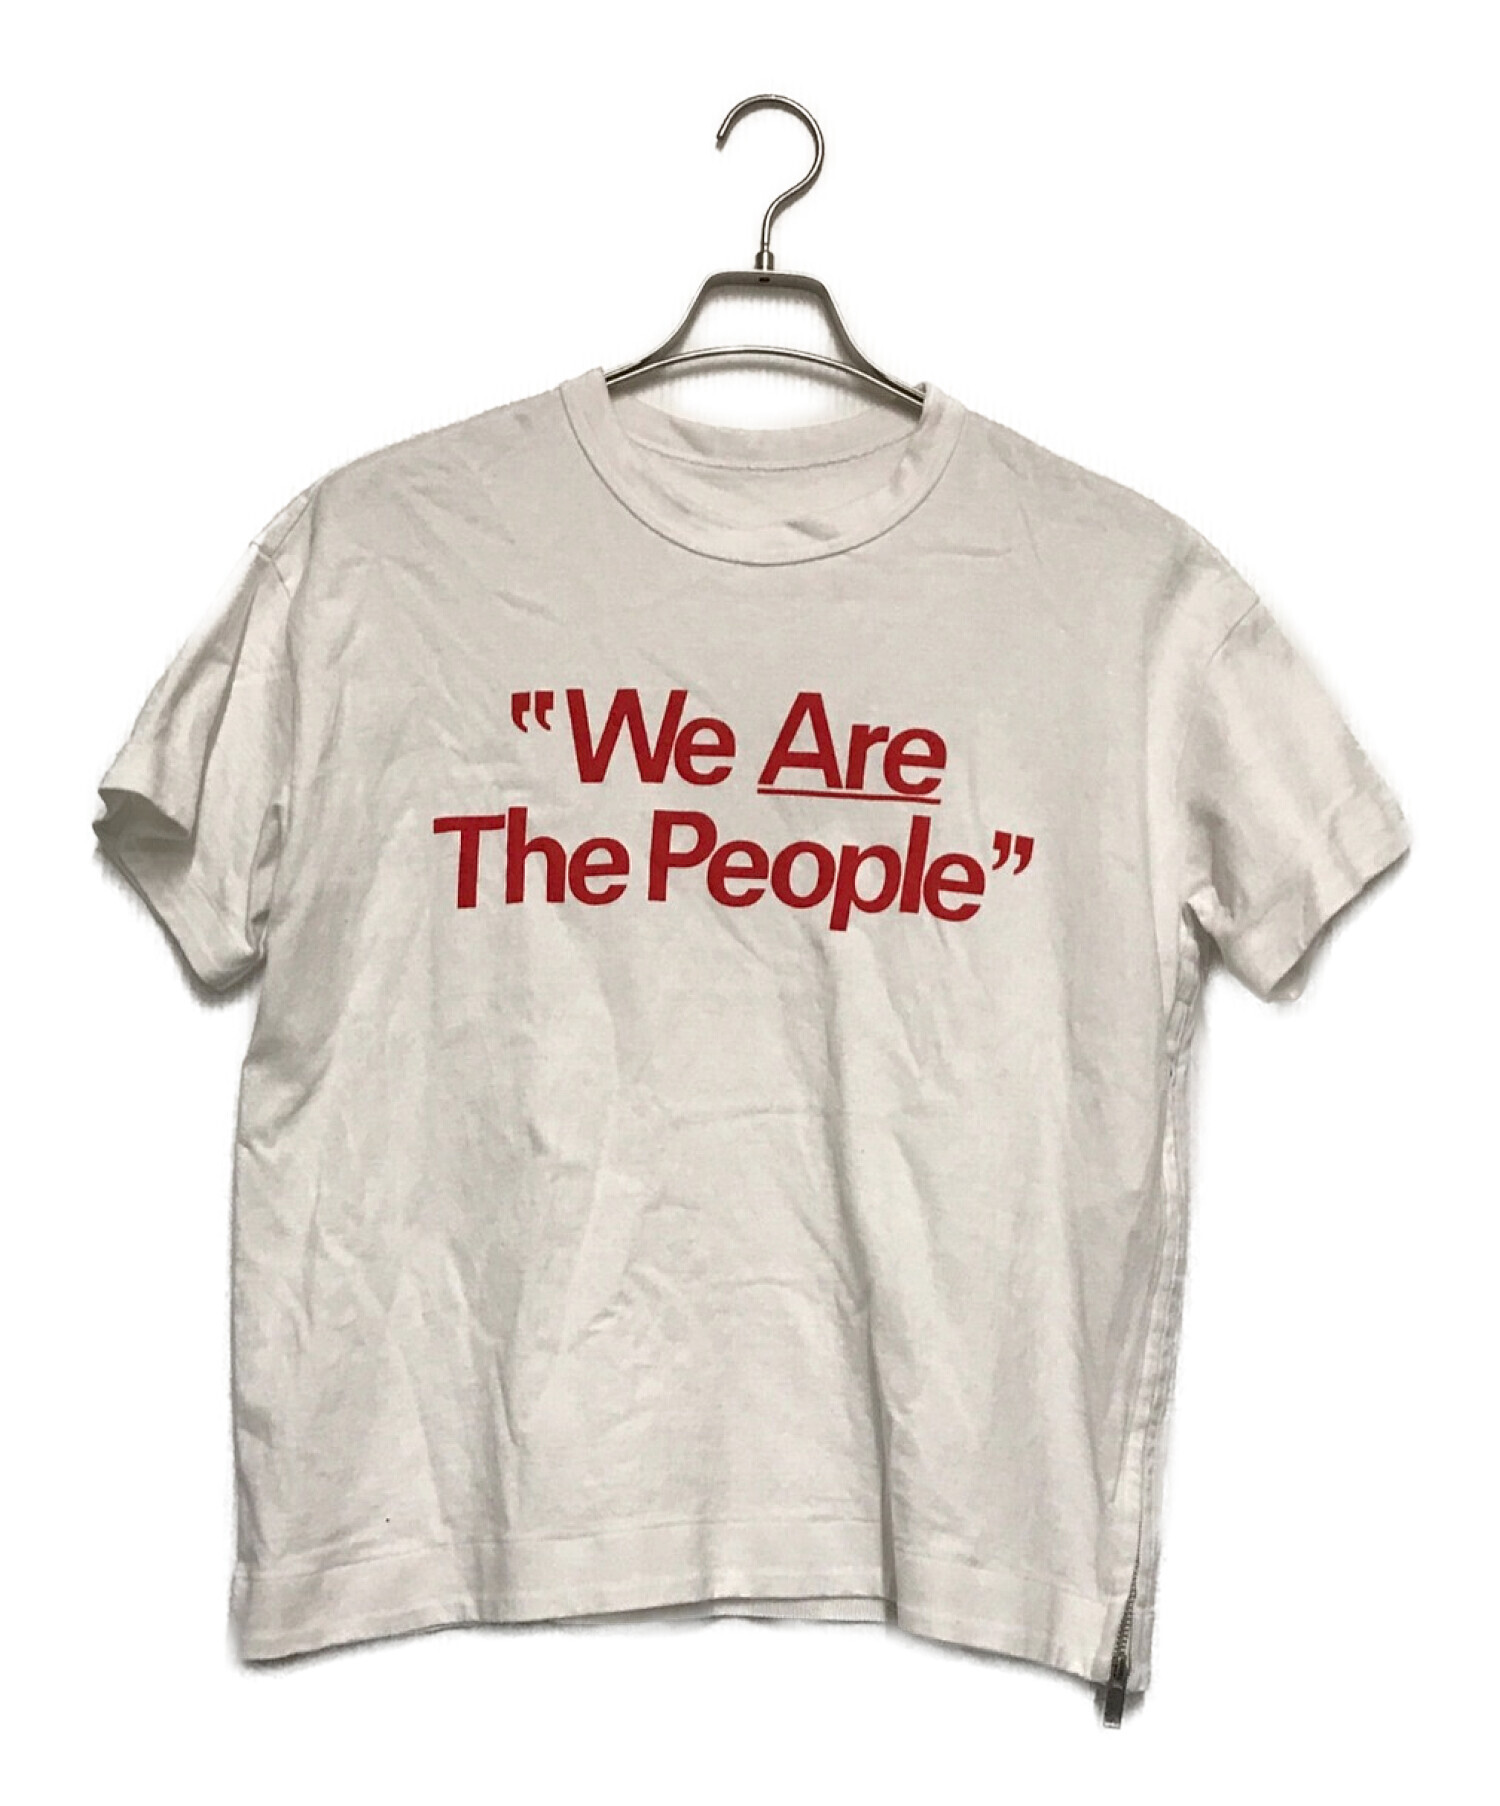 sacai Tシャツ　カットソー　we are the people